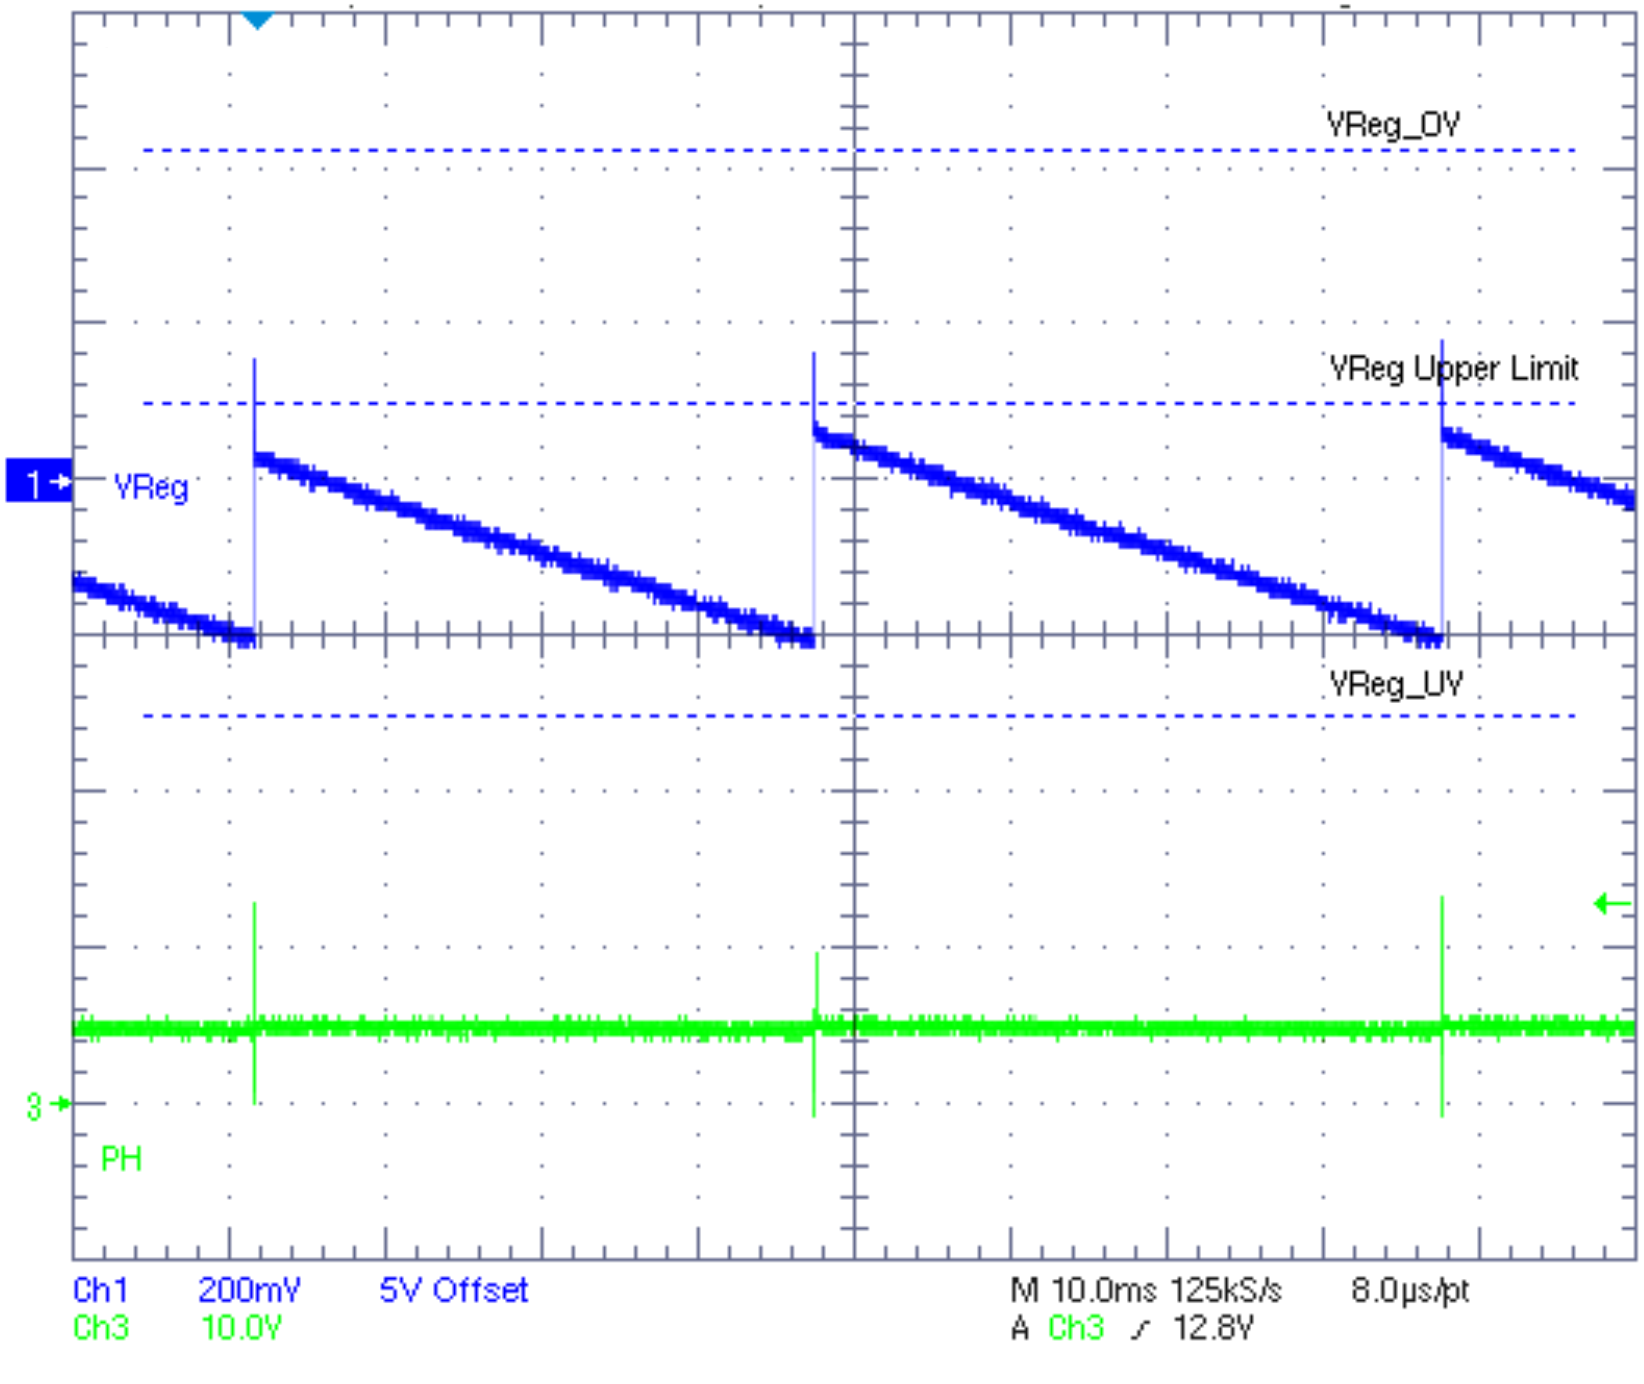 TPS54262-EP fig20_low_power_mode_slvsdp3.png